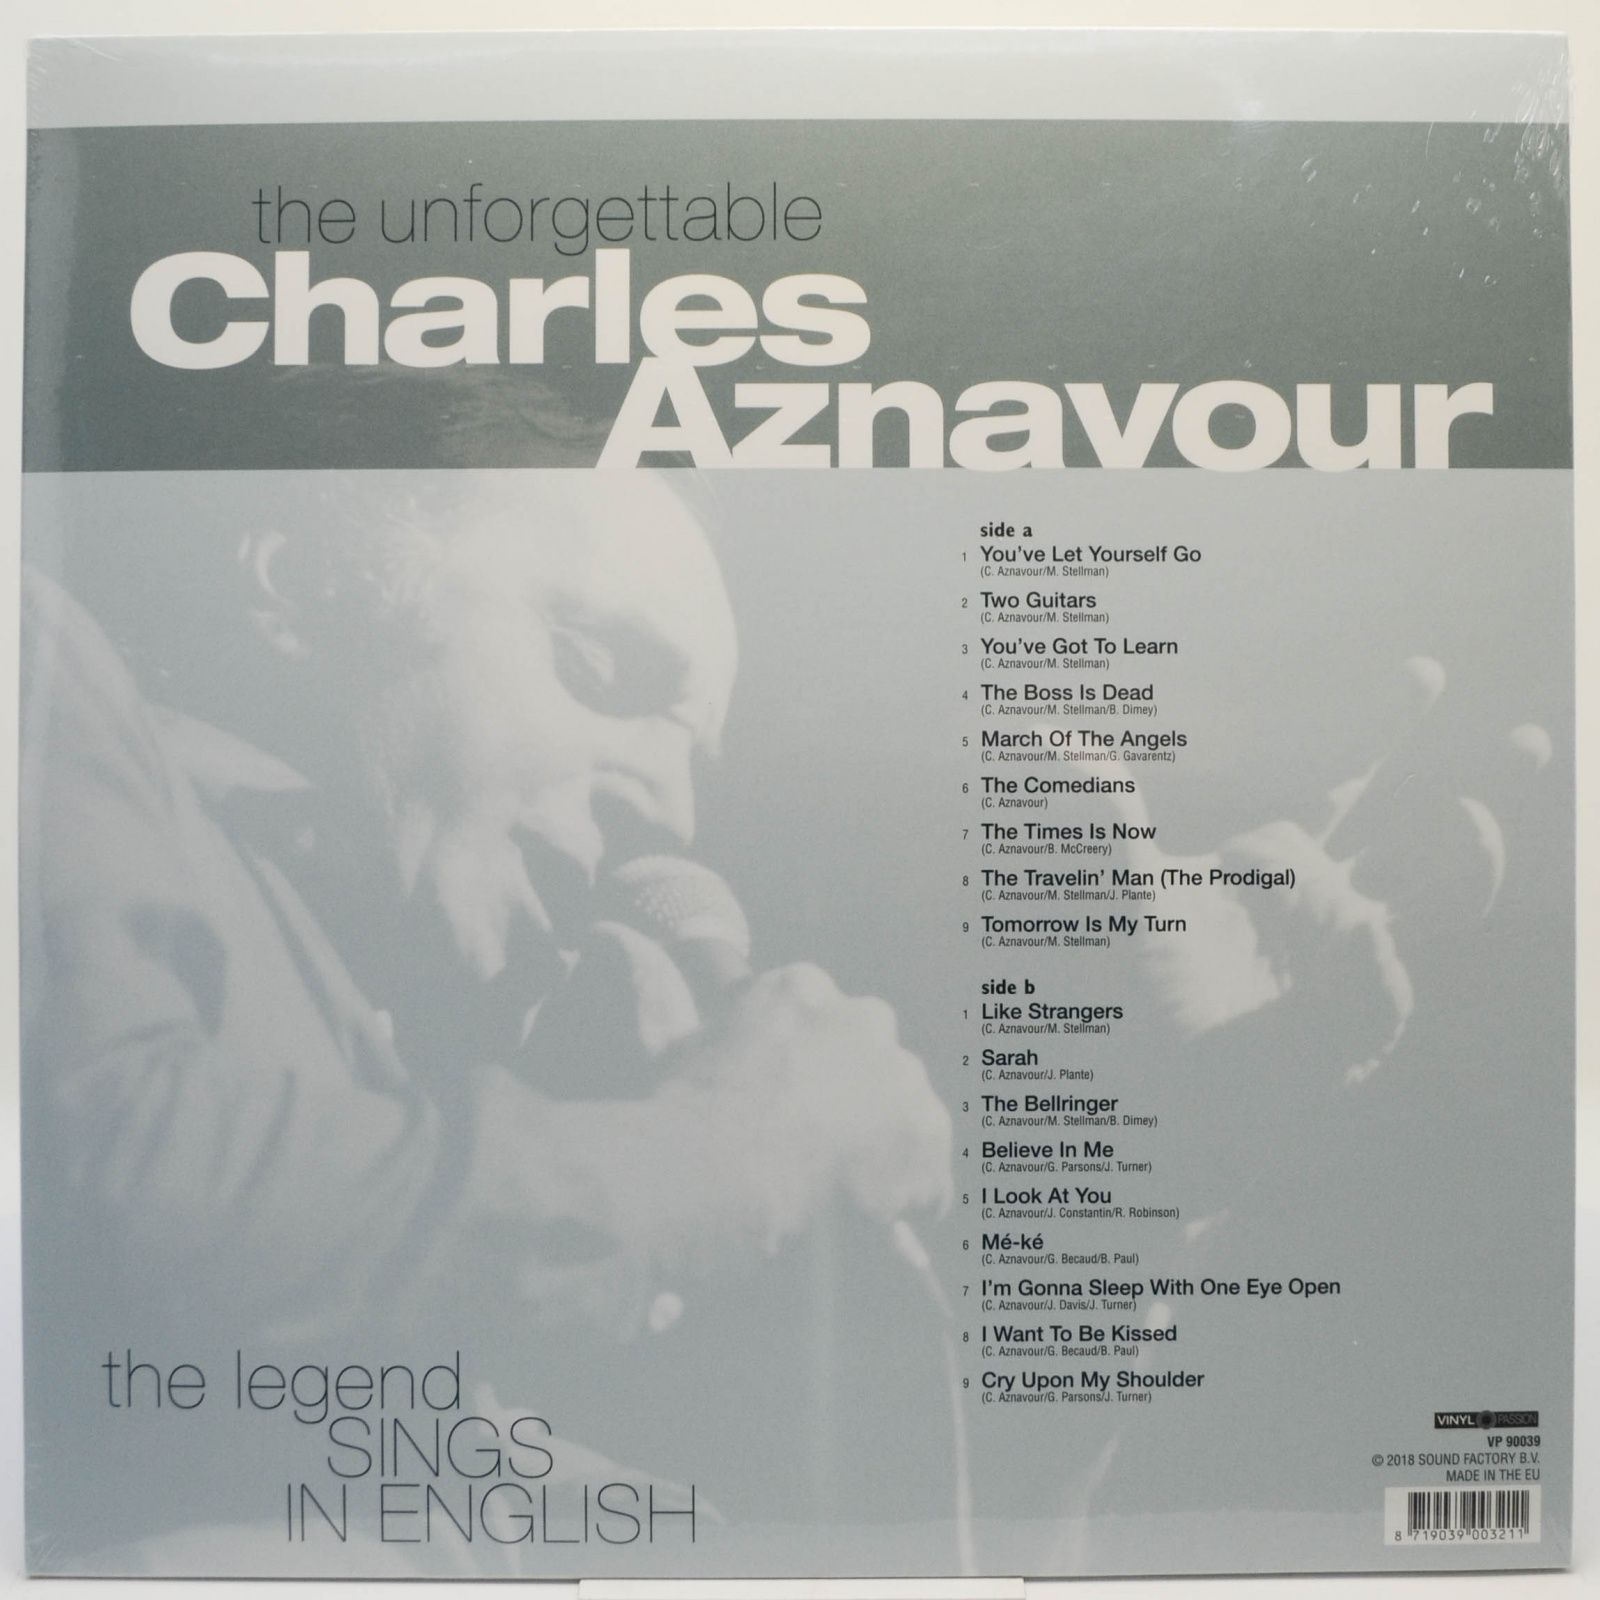 Charles Aznavour — The Legend Sings in English, 2018